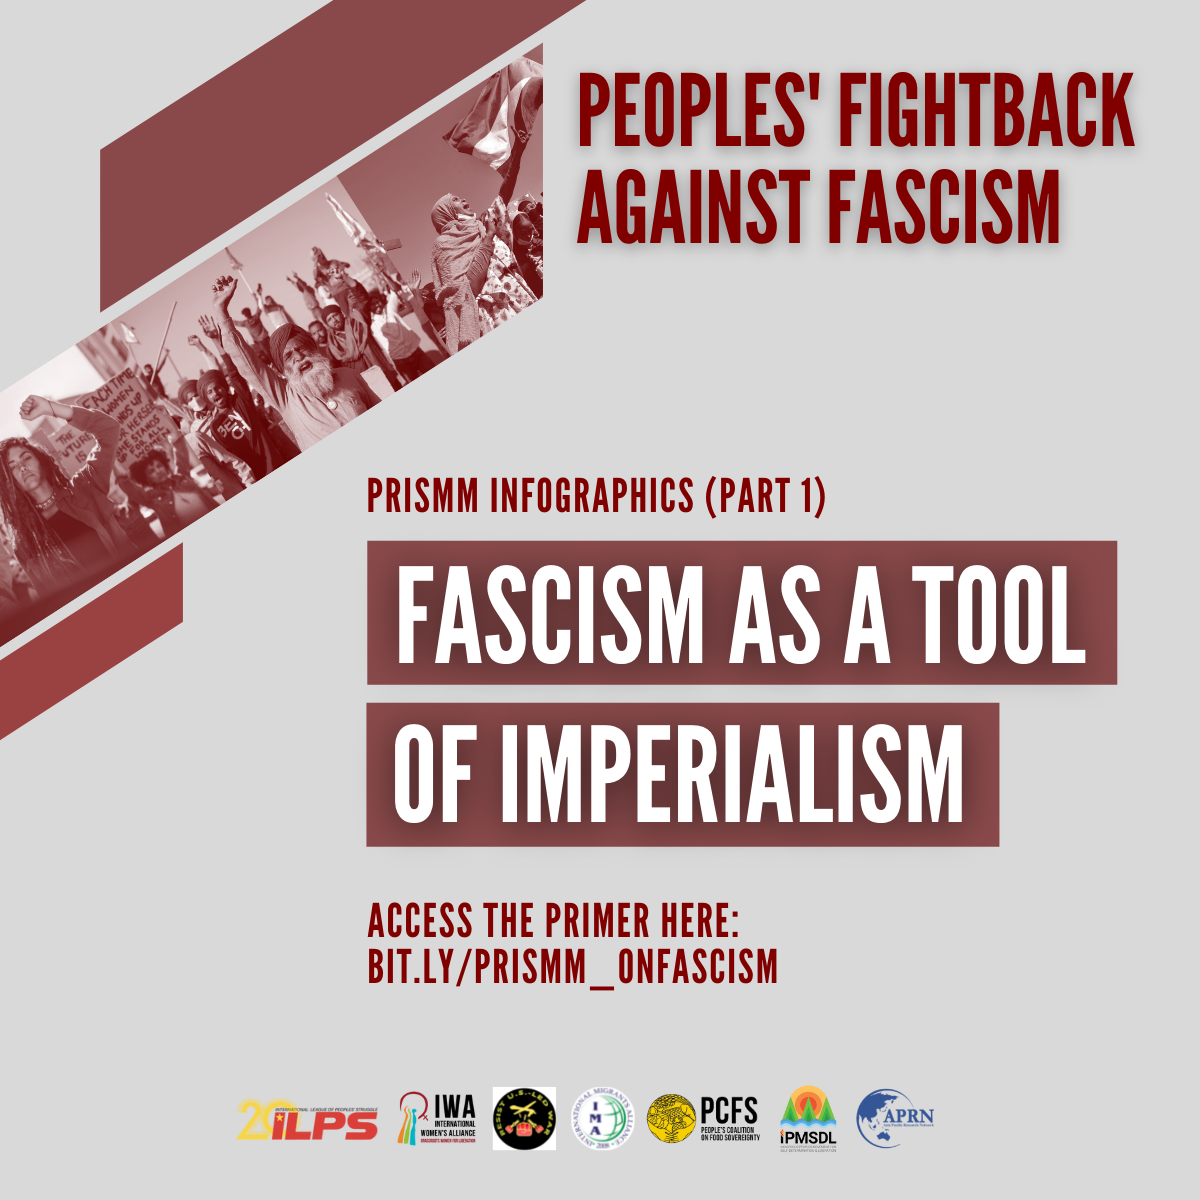 FASCISM AS A TOOL OF IMPERIALISM